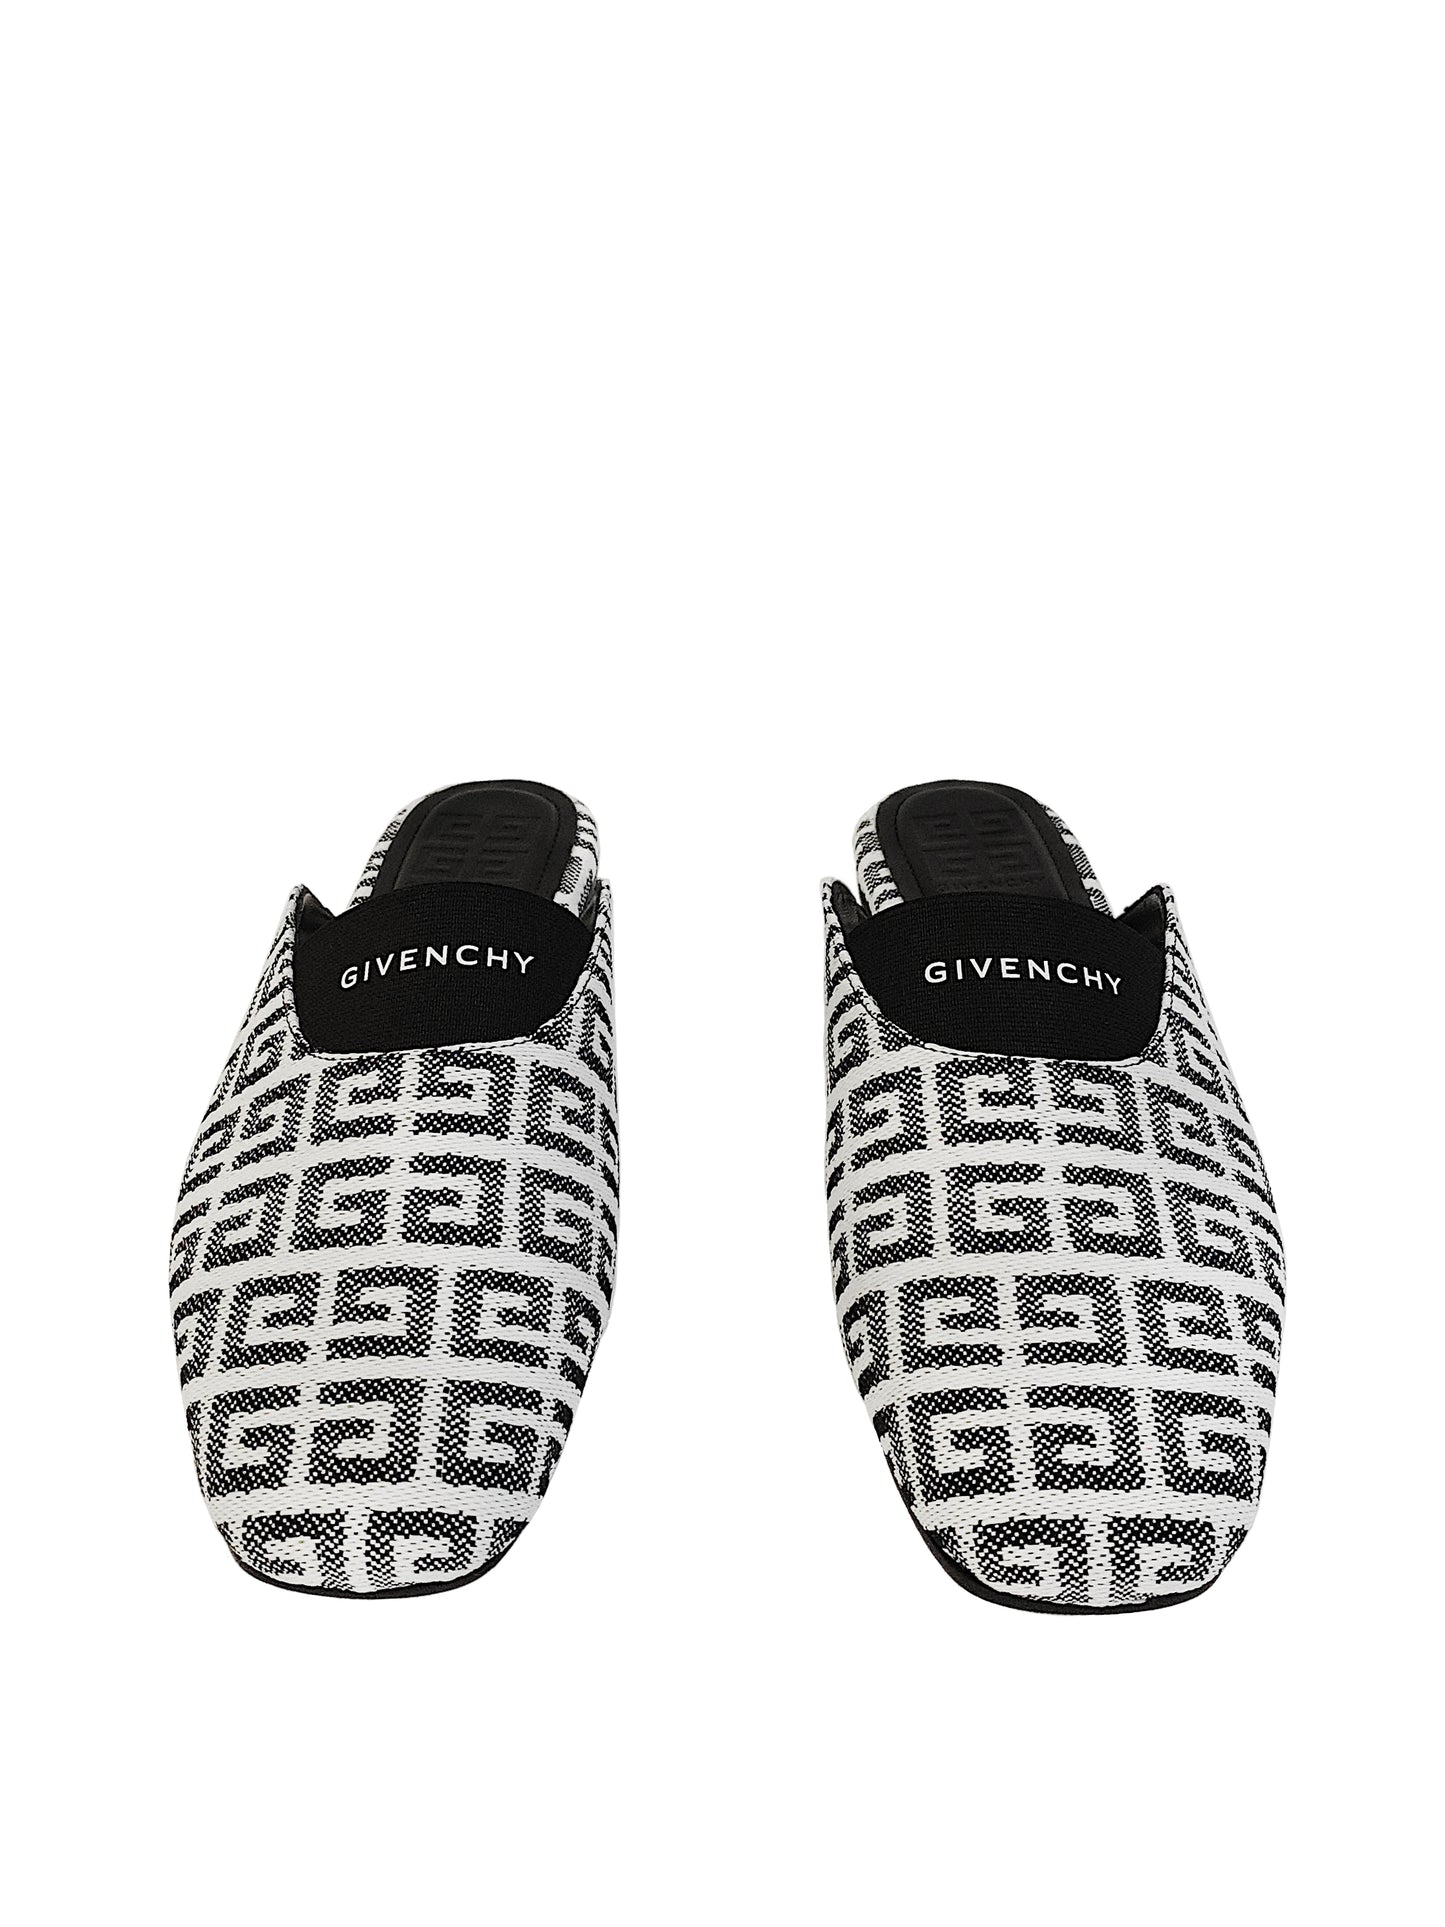 Givenchy Mules Schwarz-Weiss